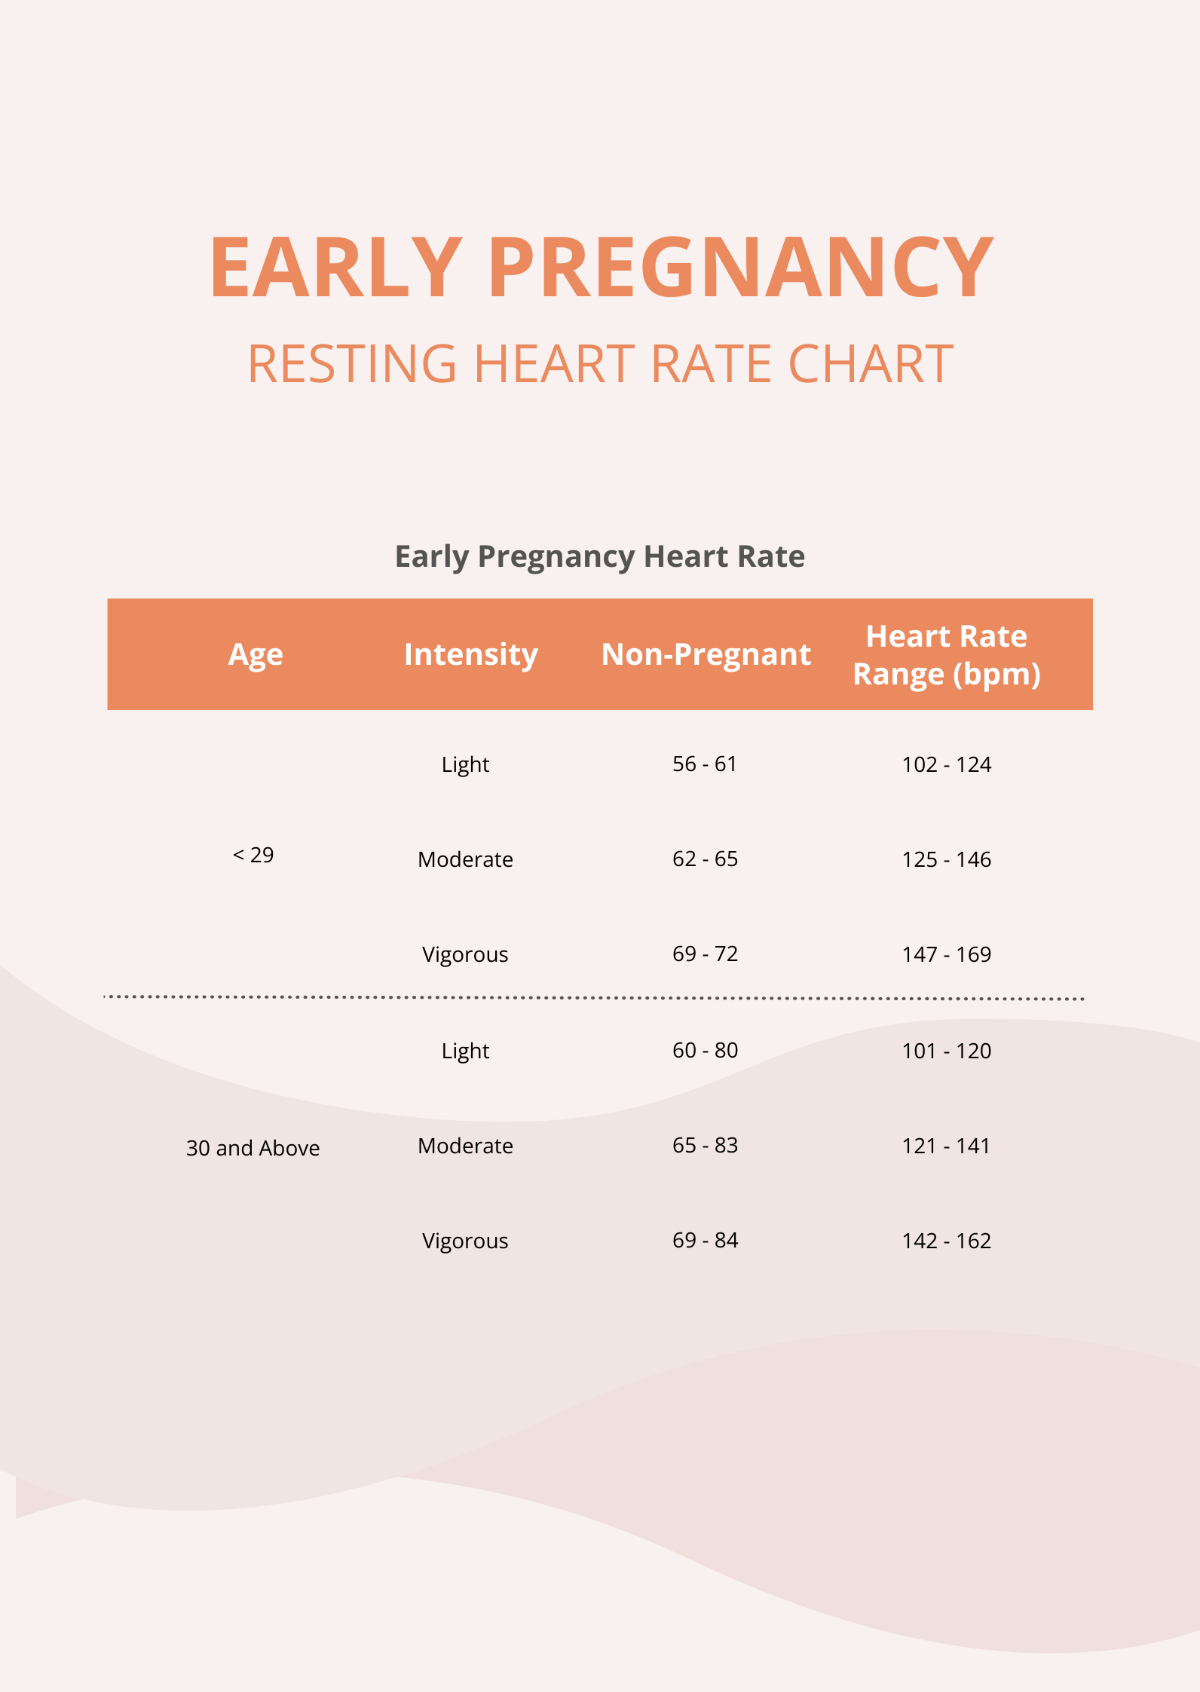 Early Pregnancy Resting Heart Rate Chart Template